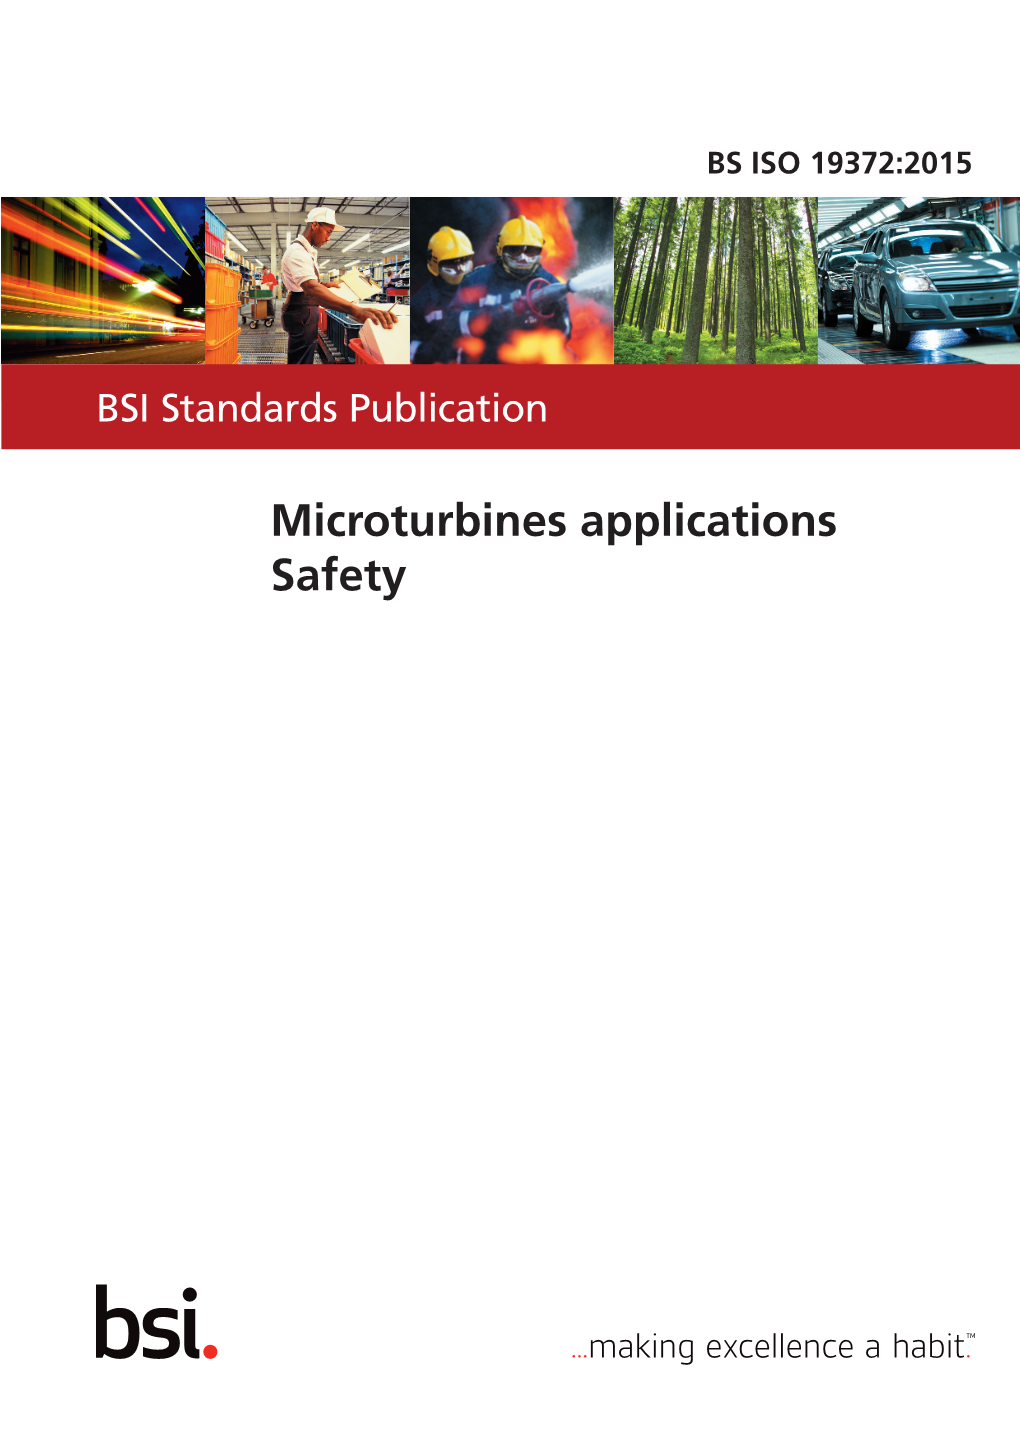 Microturbines Applications — Safety BS ISO 19372:2015 BRITISH STANDARD